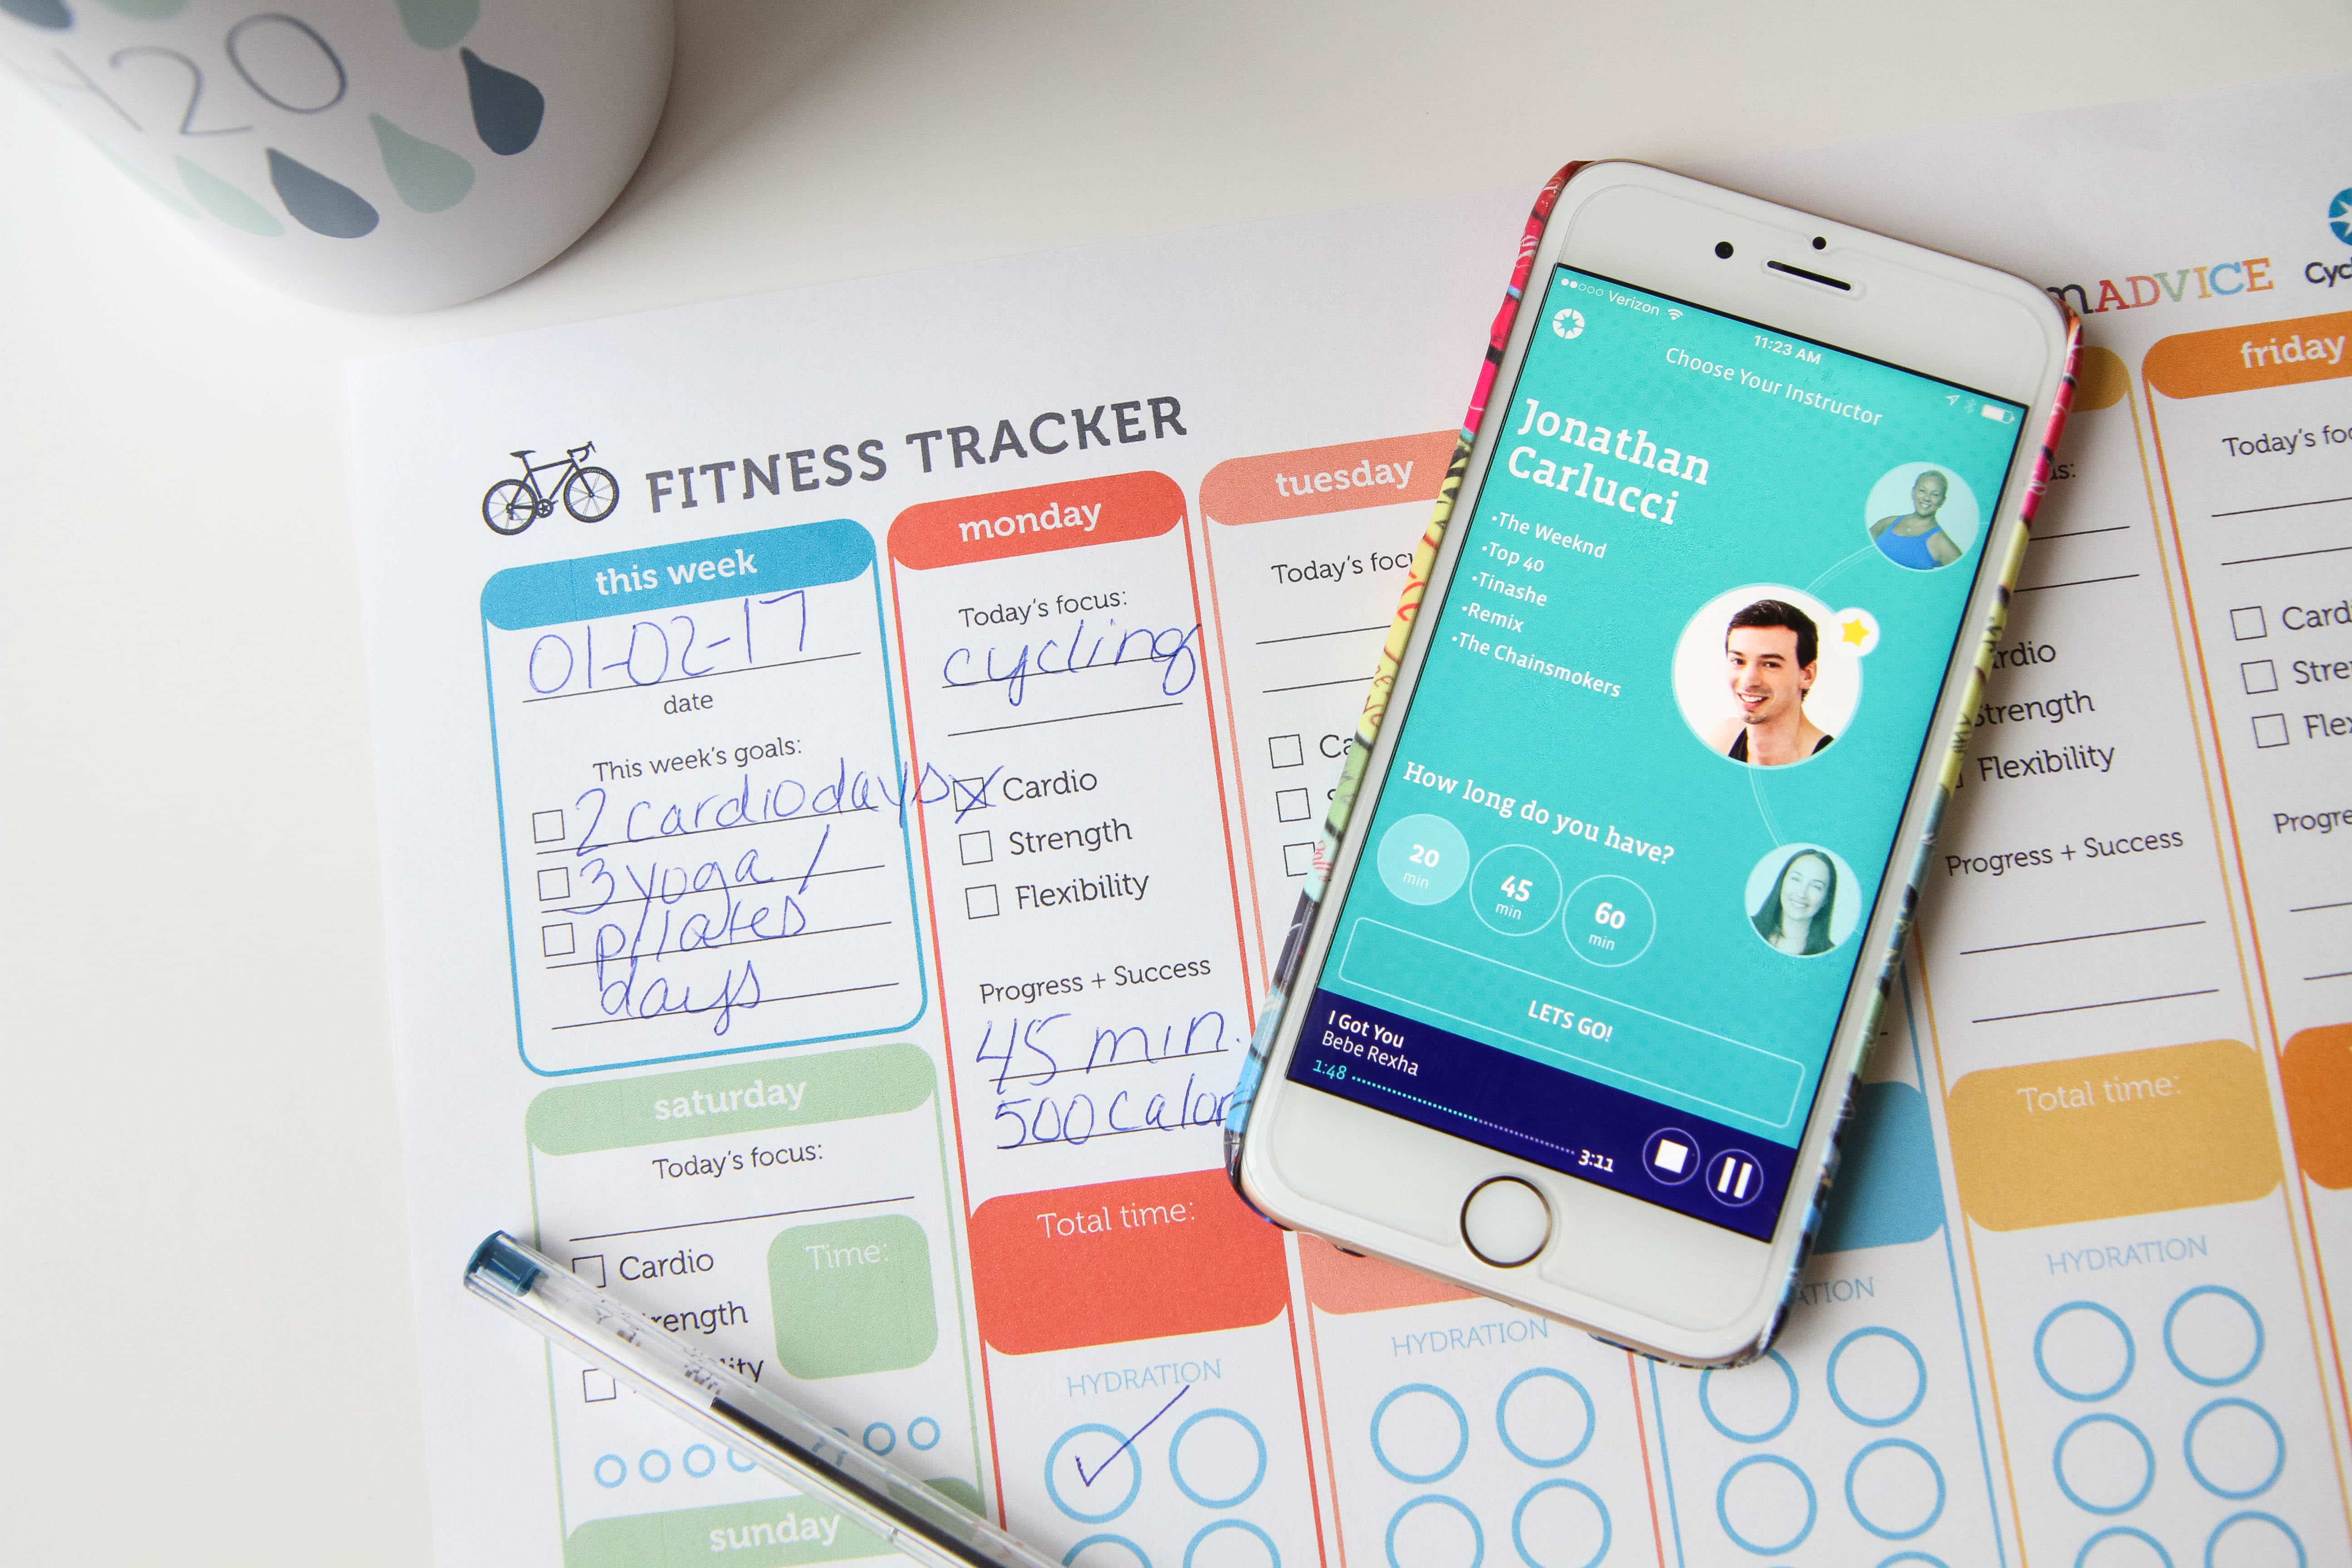 Boutique Workouts At Home (FREE Printable Fitness Tracker) from MomAdvice.com